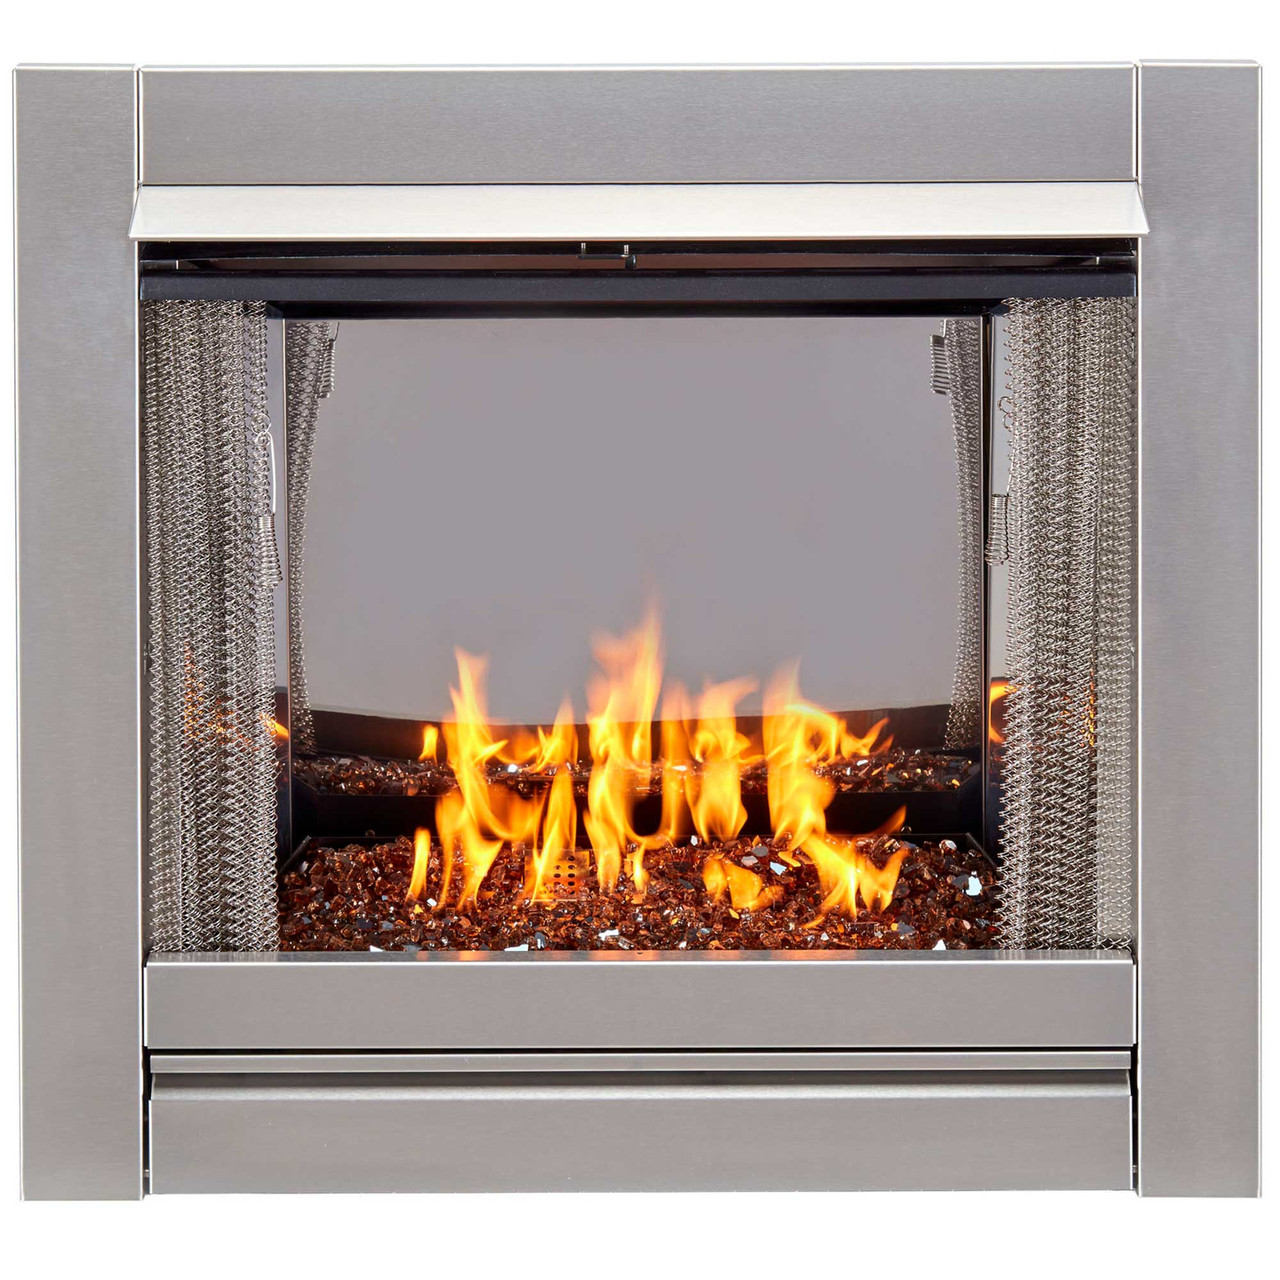 The Main Principles Of Gas Fireplace Insert Lowe's